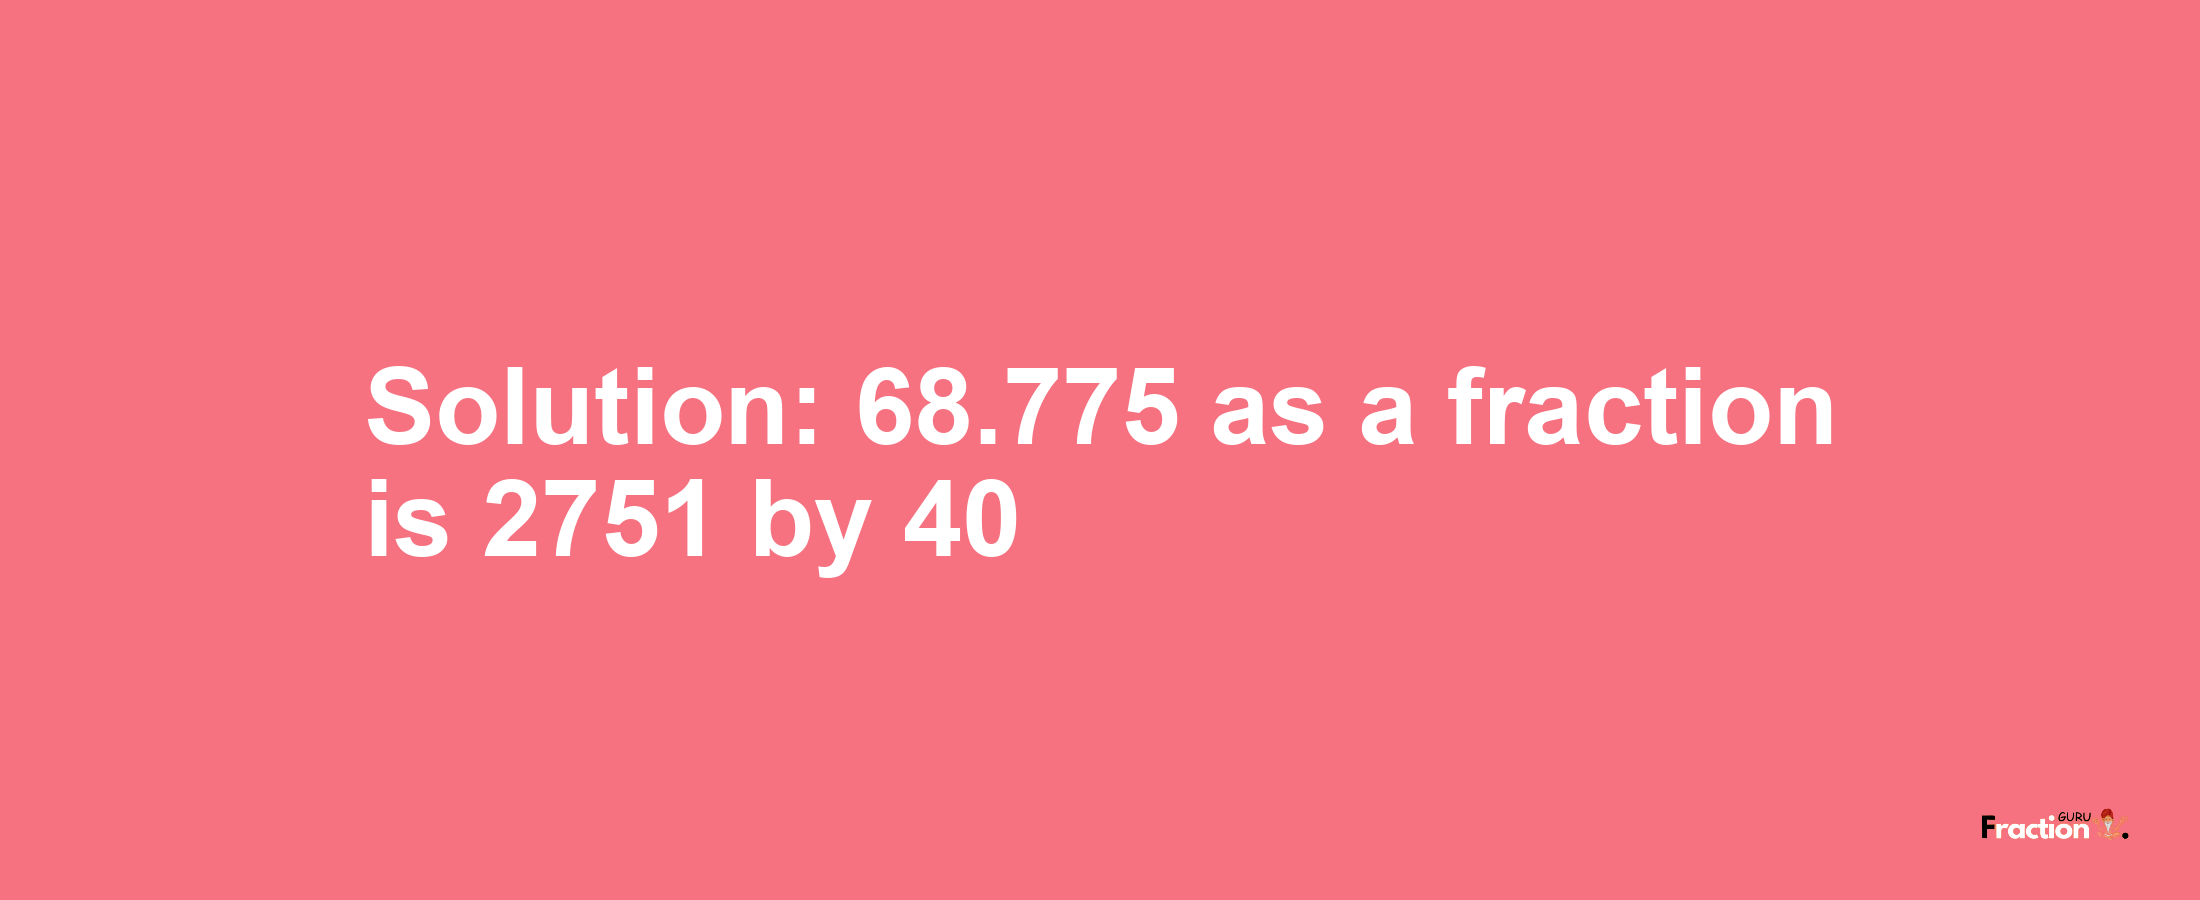 Solution:68.775 as a fraction is 2751/40